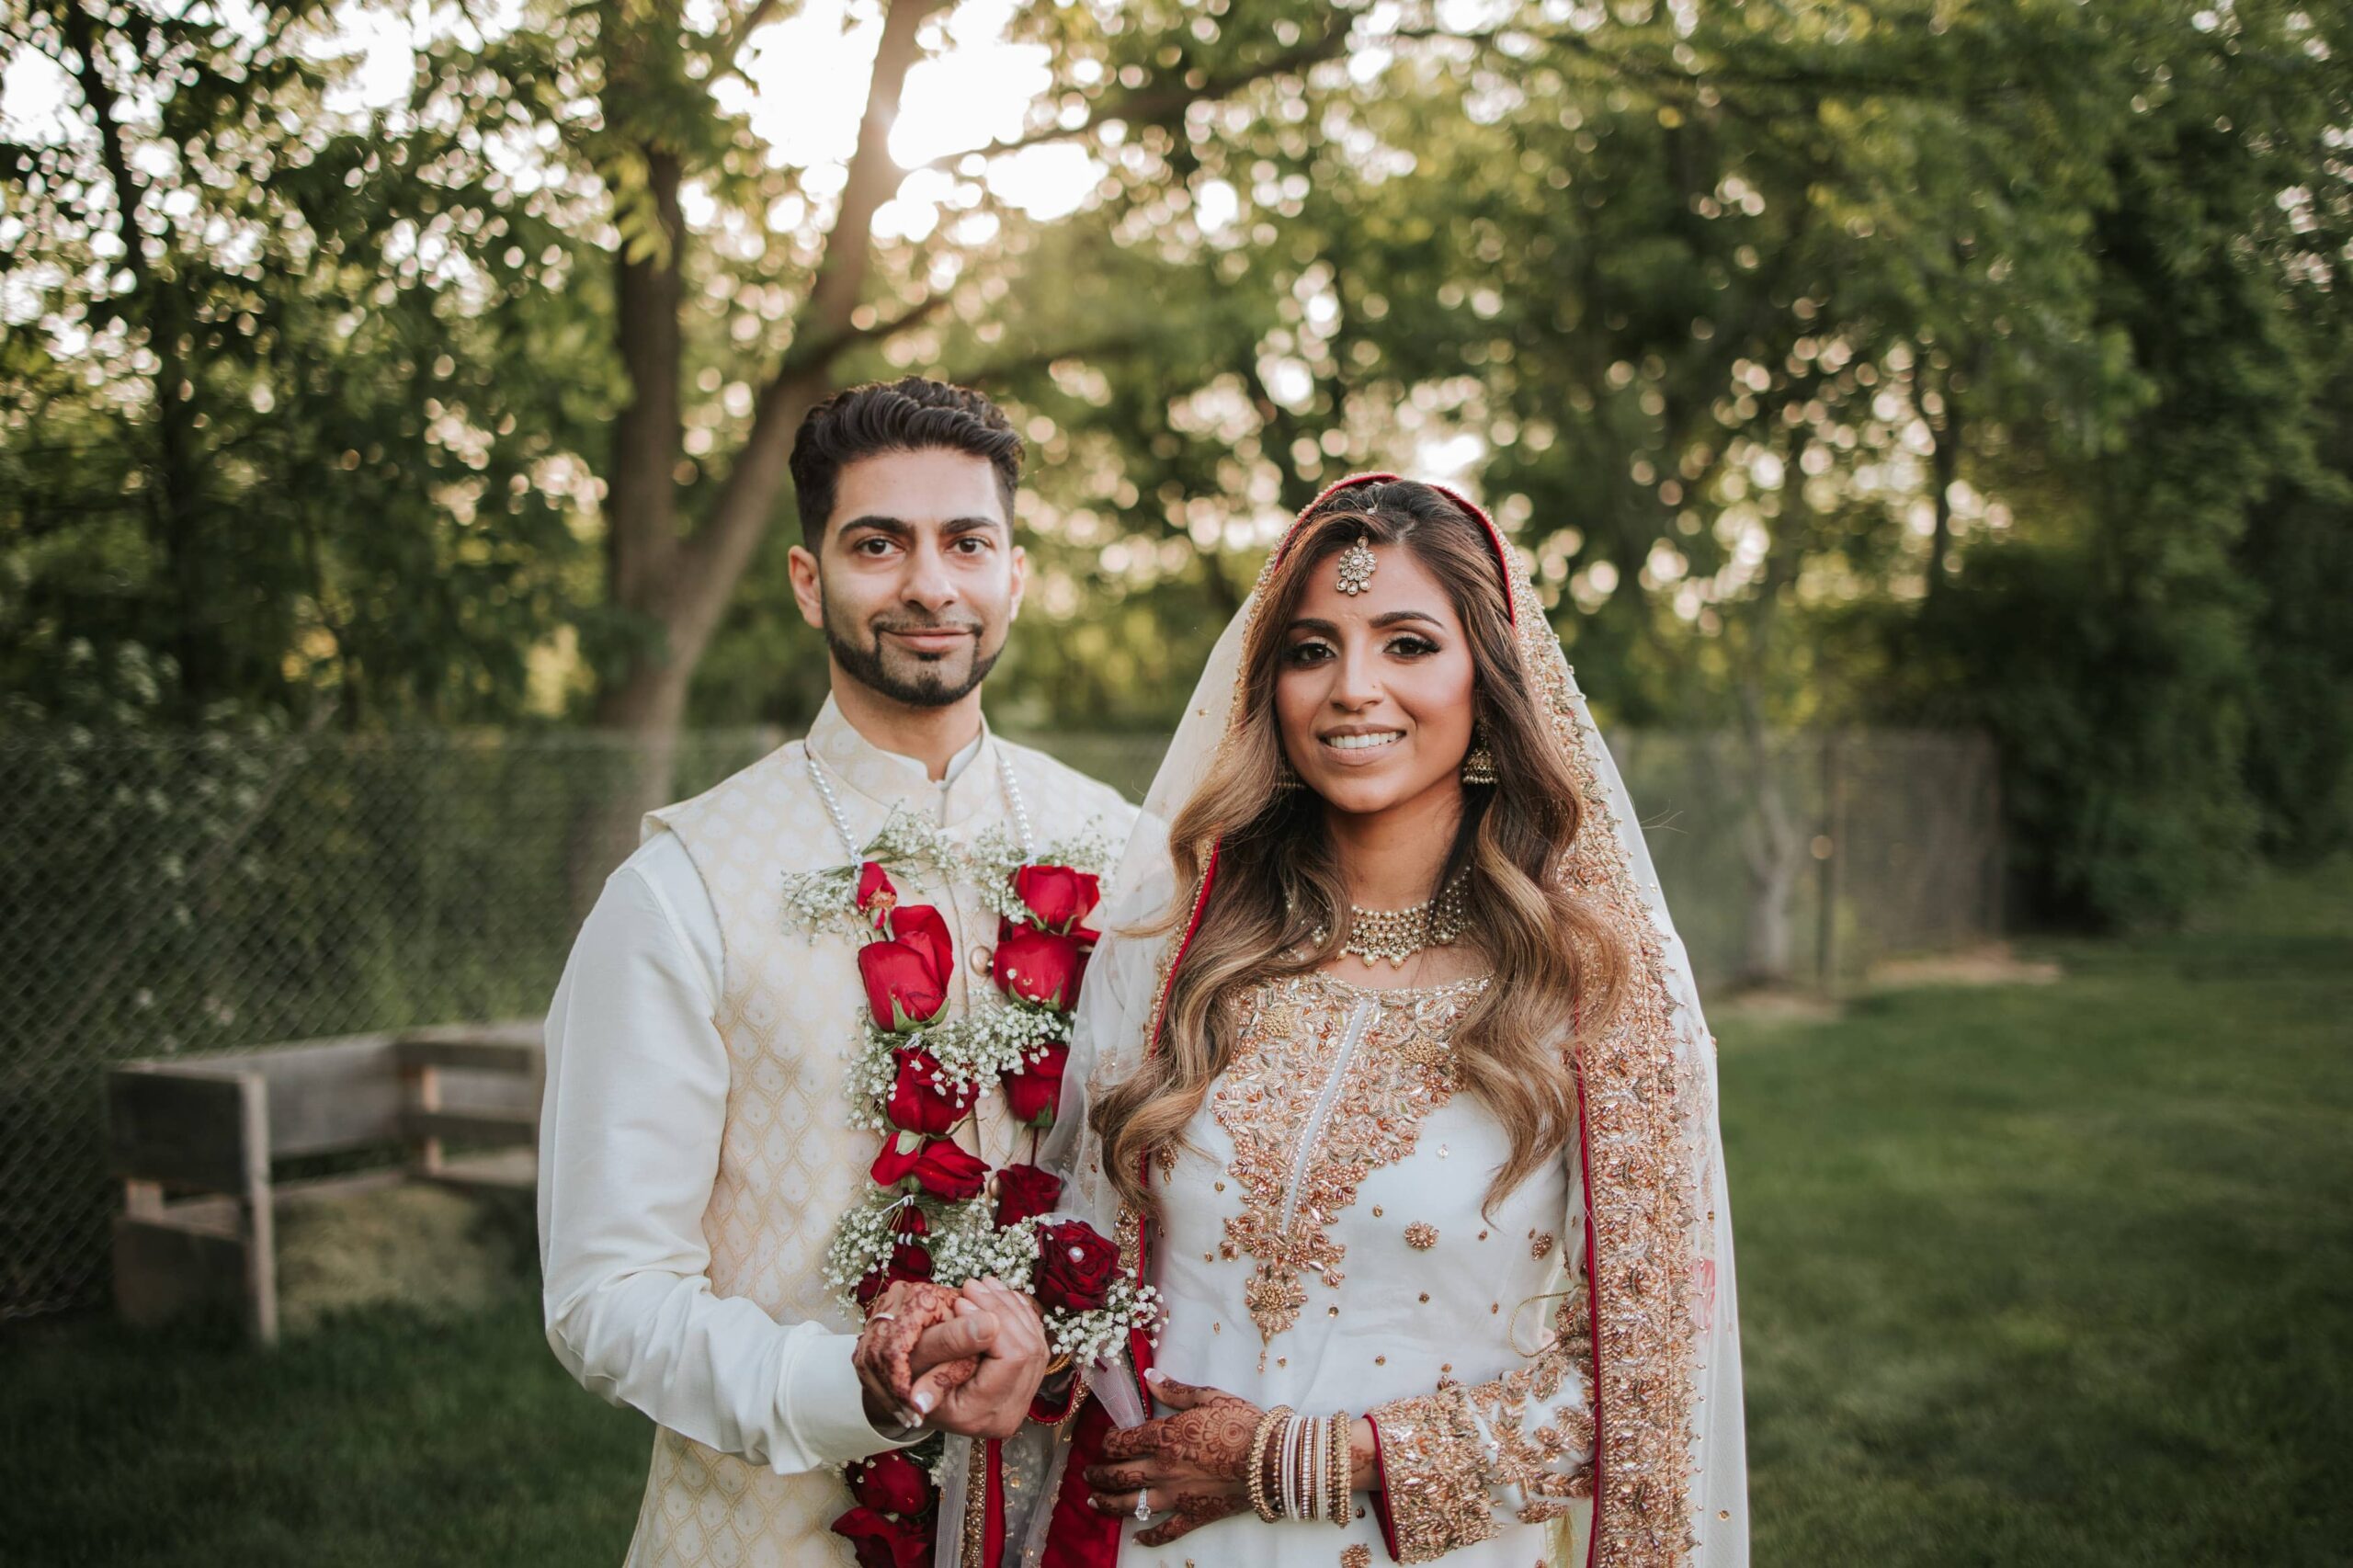 South Asian Wedding. Bride and Groom during portraits after their Nikkah Ceremony